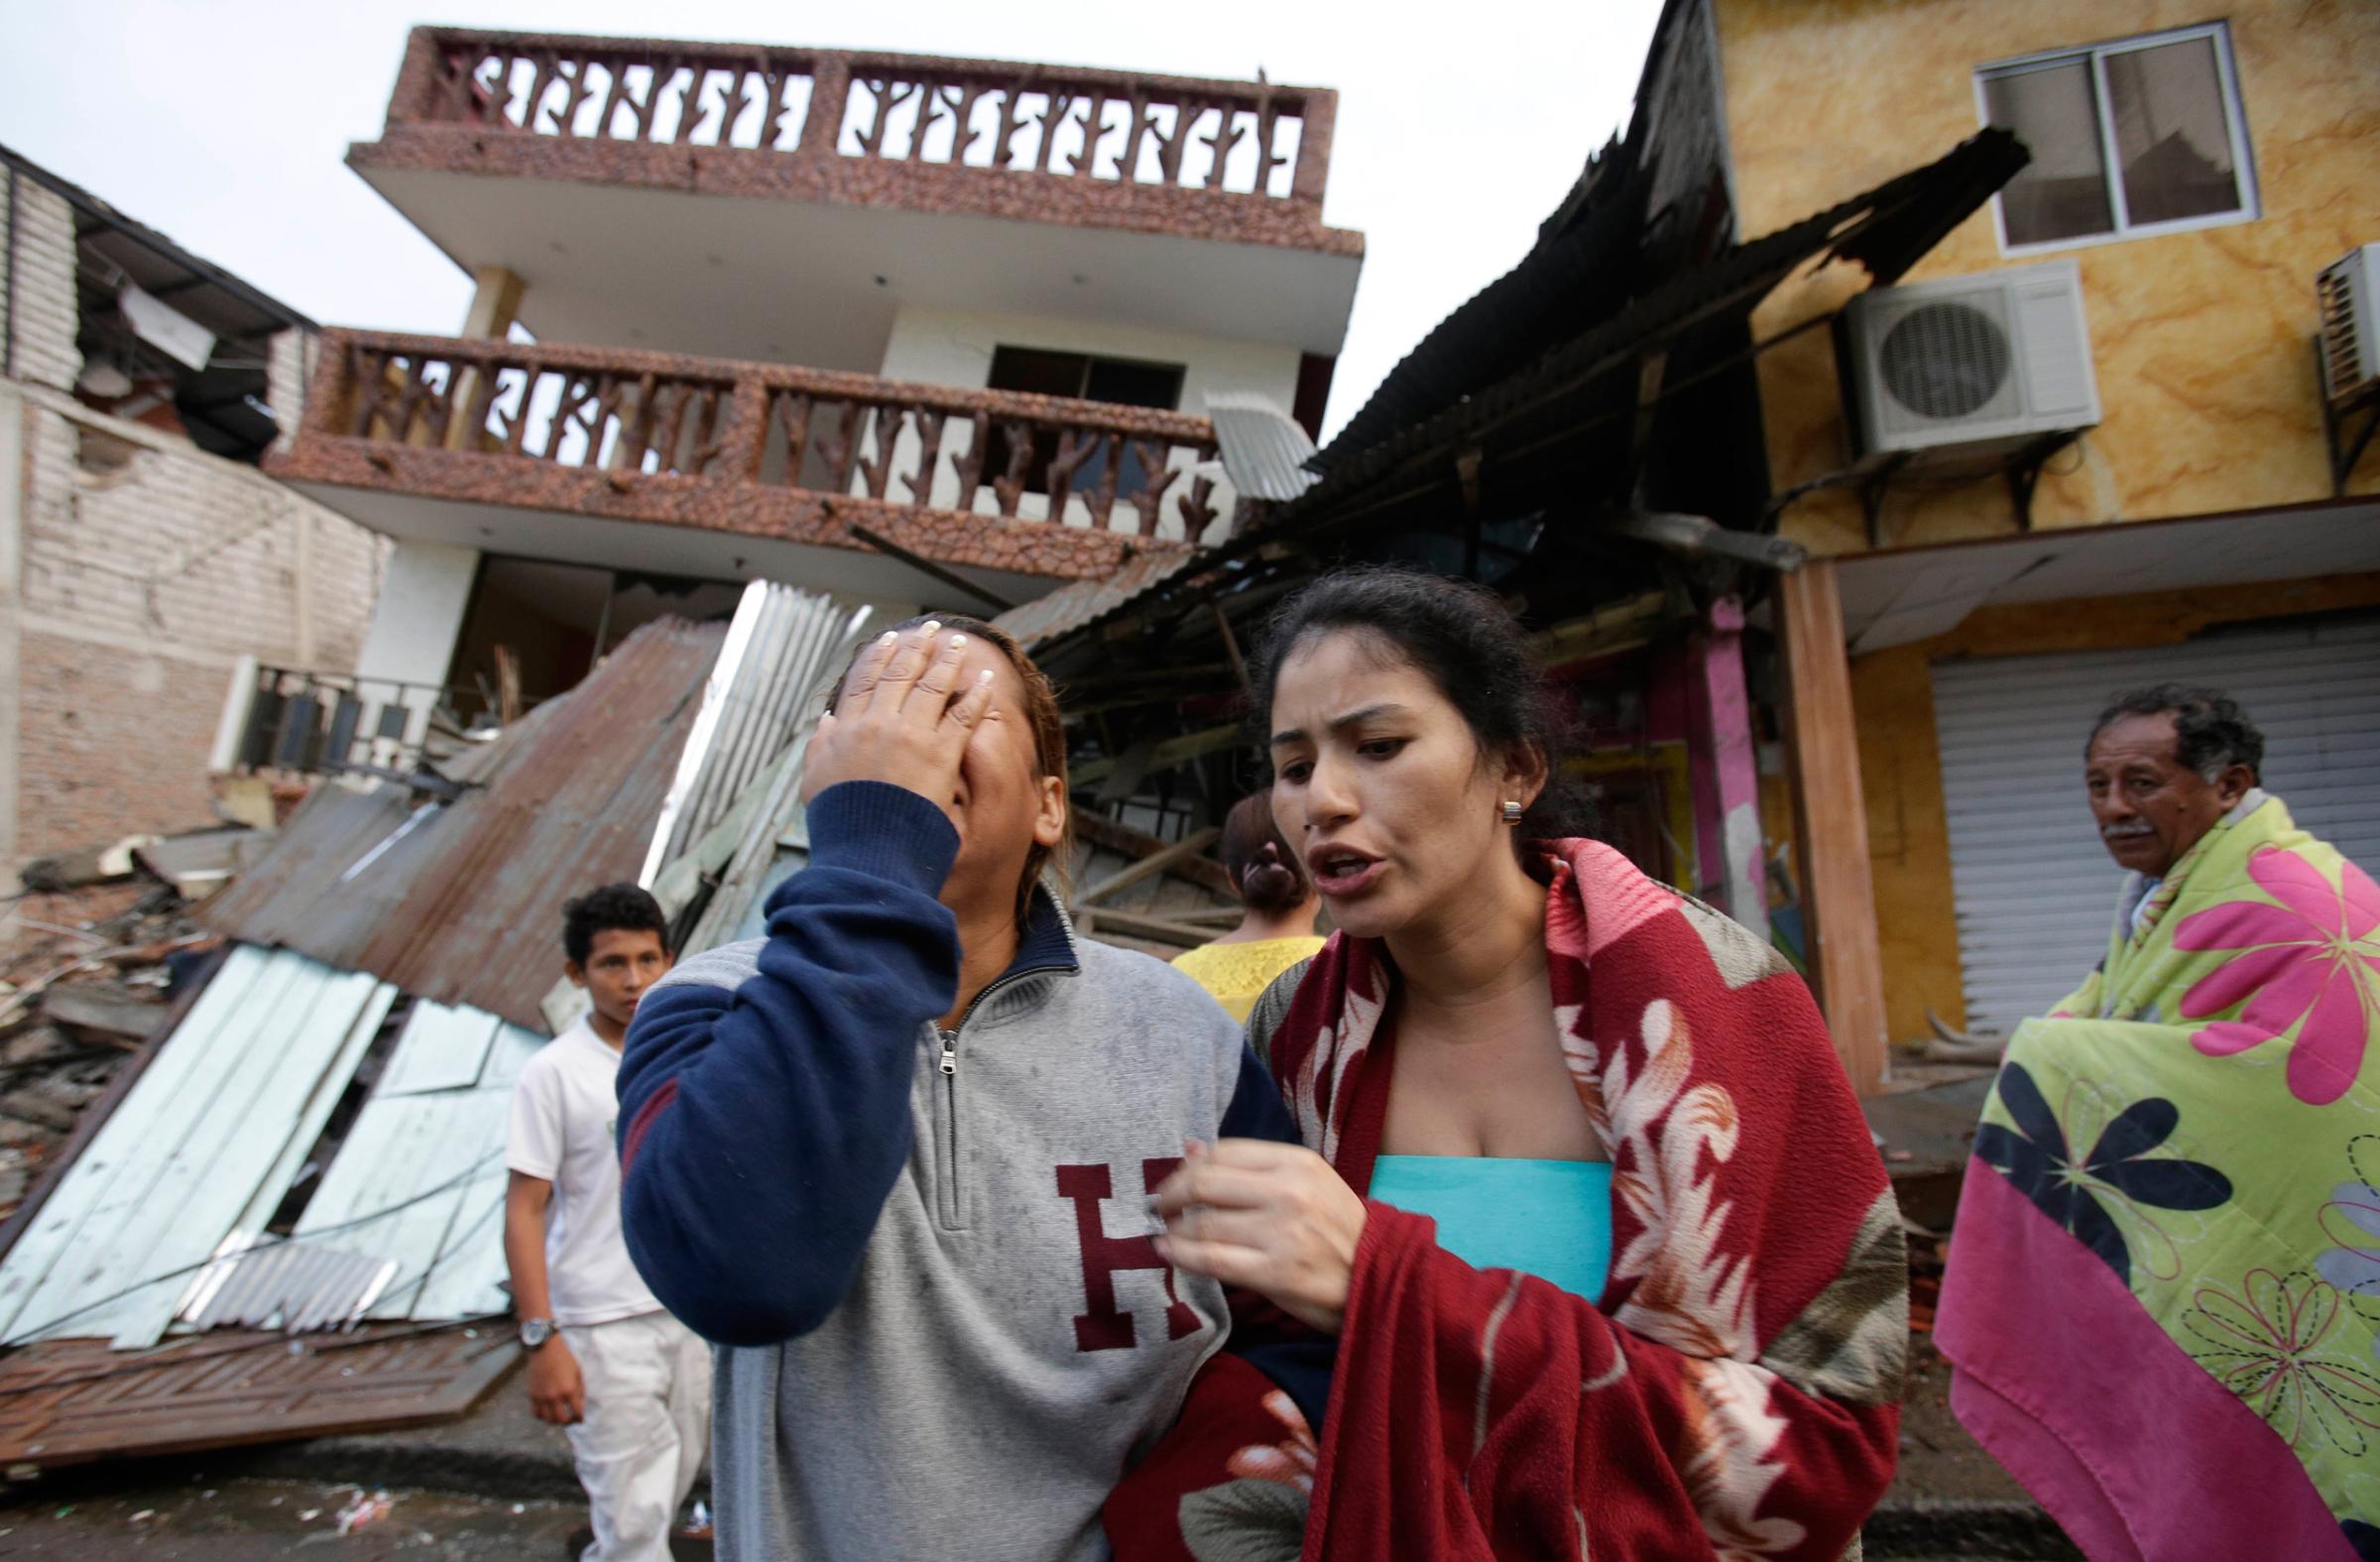 A woman cries as she stands next to house destroyed by the earthquake in the Pacific coastal town of Pedernales, Ecuador, Sunday, April 17, 2016. The strongest earthquake to hit Ecuador in decades flattened buildings and buckled highways along its Pacific coast, sending the Andean nation into a state of emergency. As rescue workers rushed in, officials said Sunday at least 77 people were killed, over 570 injured and the damage stretched for hundreds of miles to the capital and other major cities.(AP Photo/Dolores Ochoa)